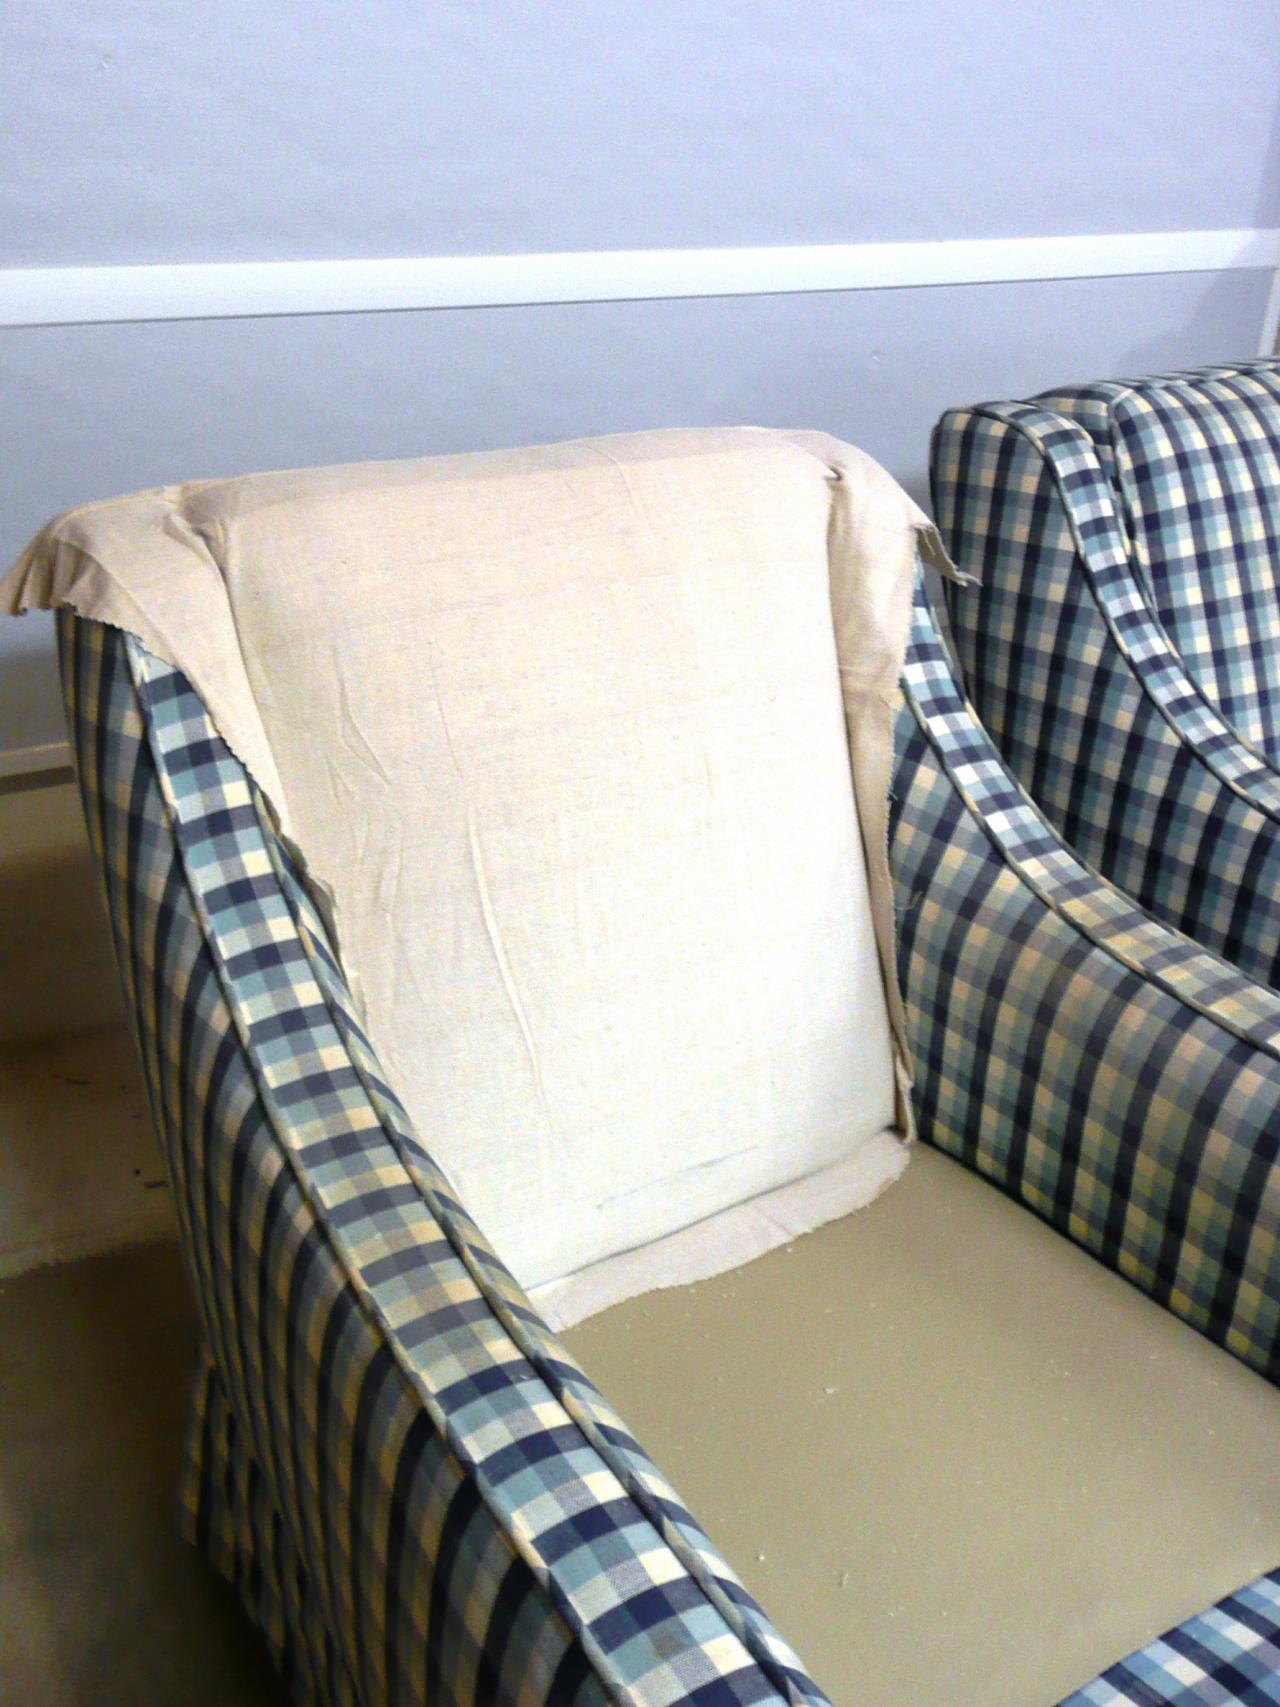 How To Make Arm Chair Slipcovers For, T Cushion Chair Slipcover Pattern